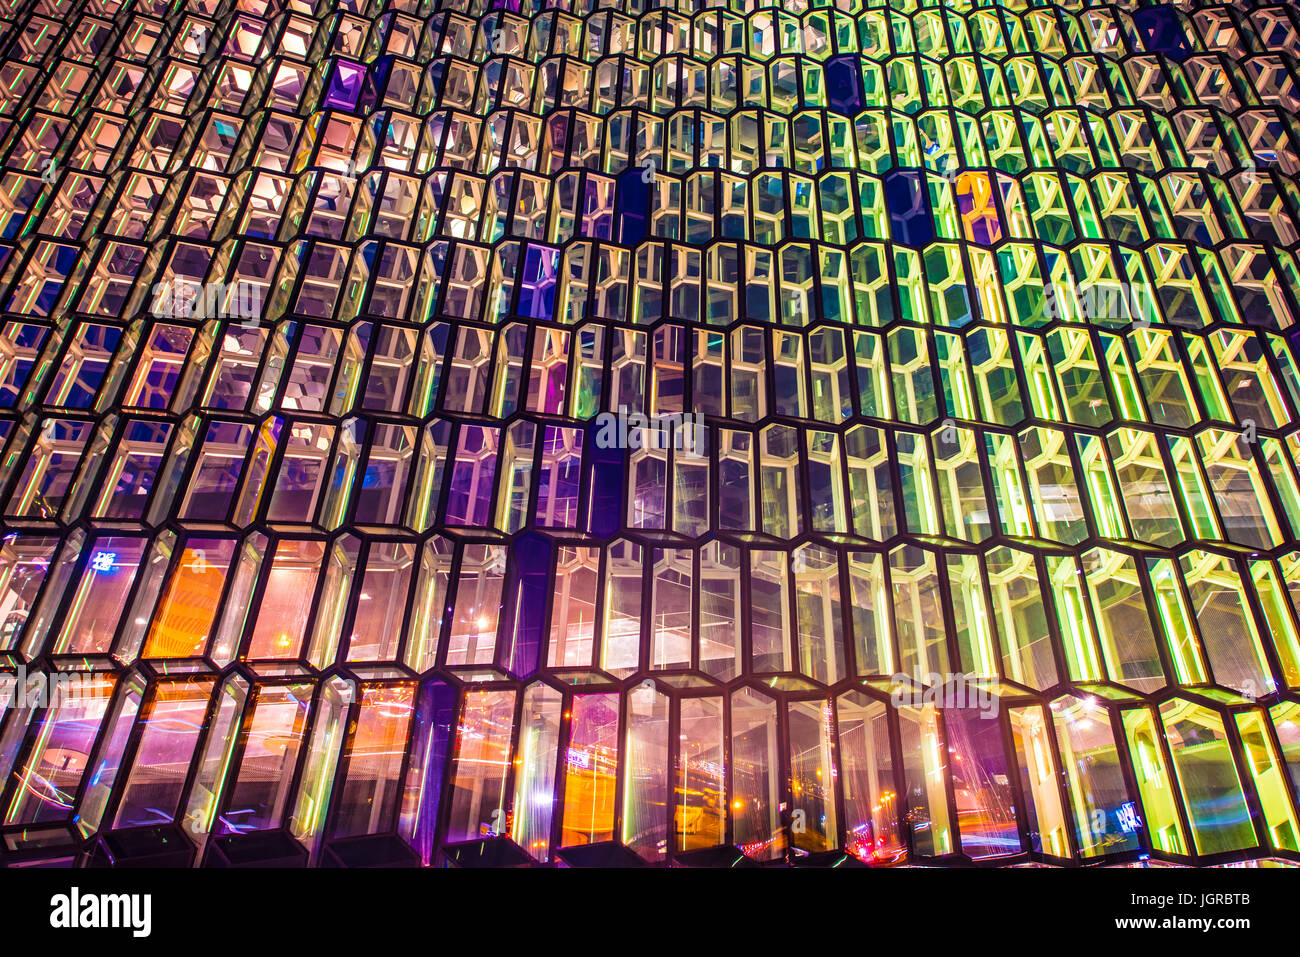 Closeup of Harpa Concert Hall Building in Reykjavik, Iceland Stock Photo